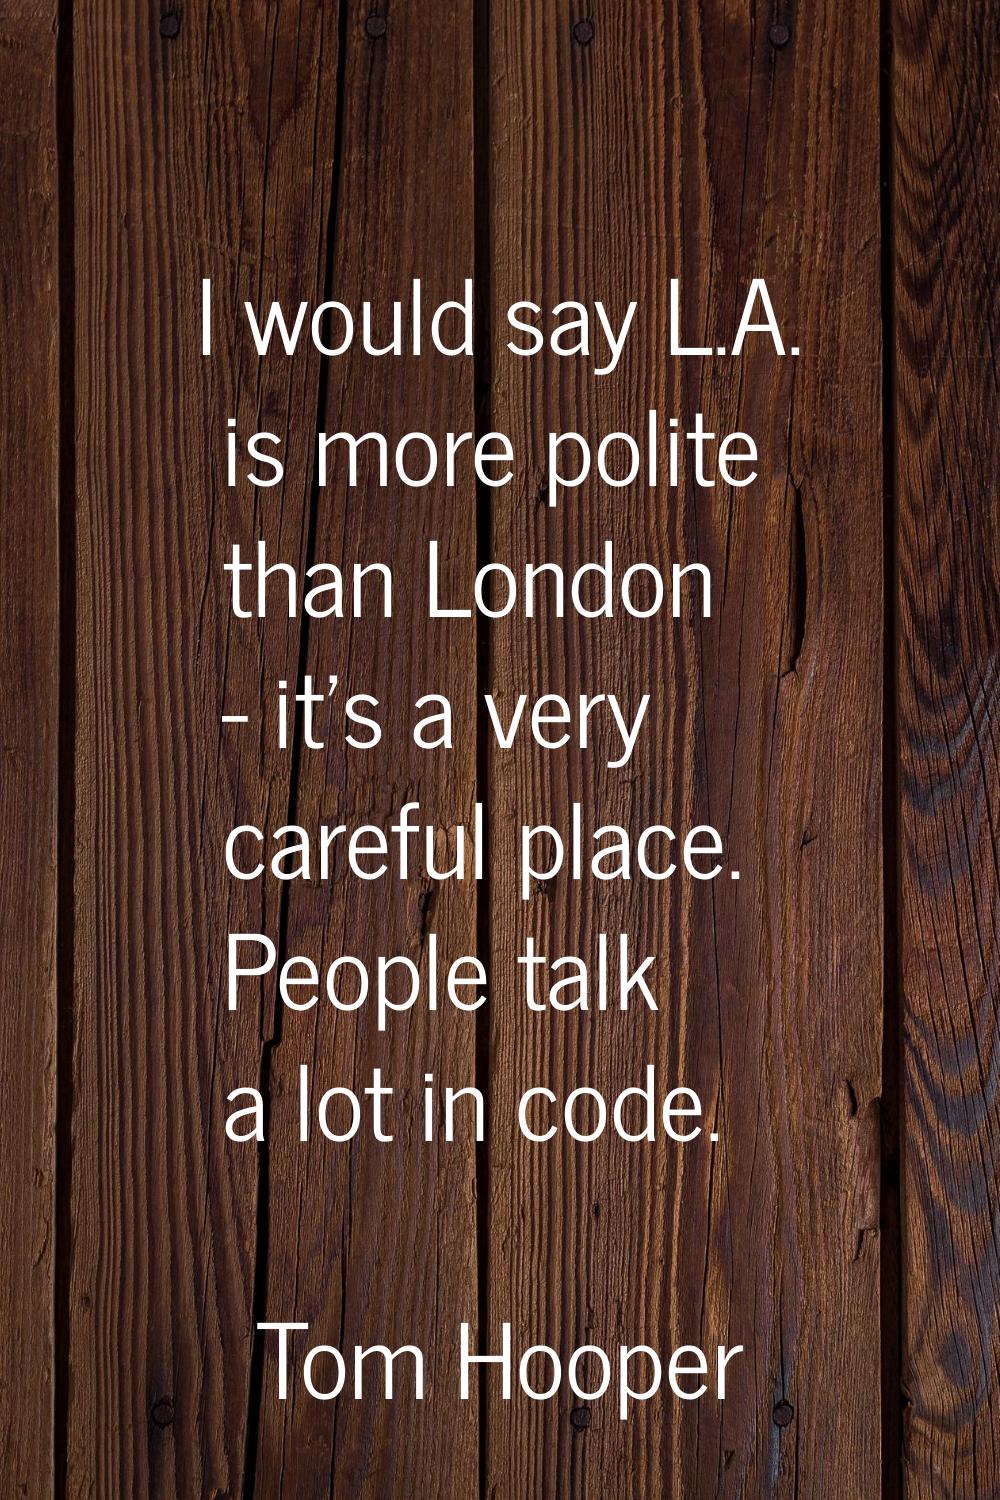 I would say L.A. is more polite than London - it's a very careful place. People talk a lot in code.